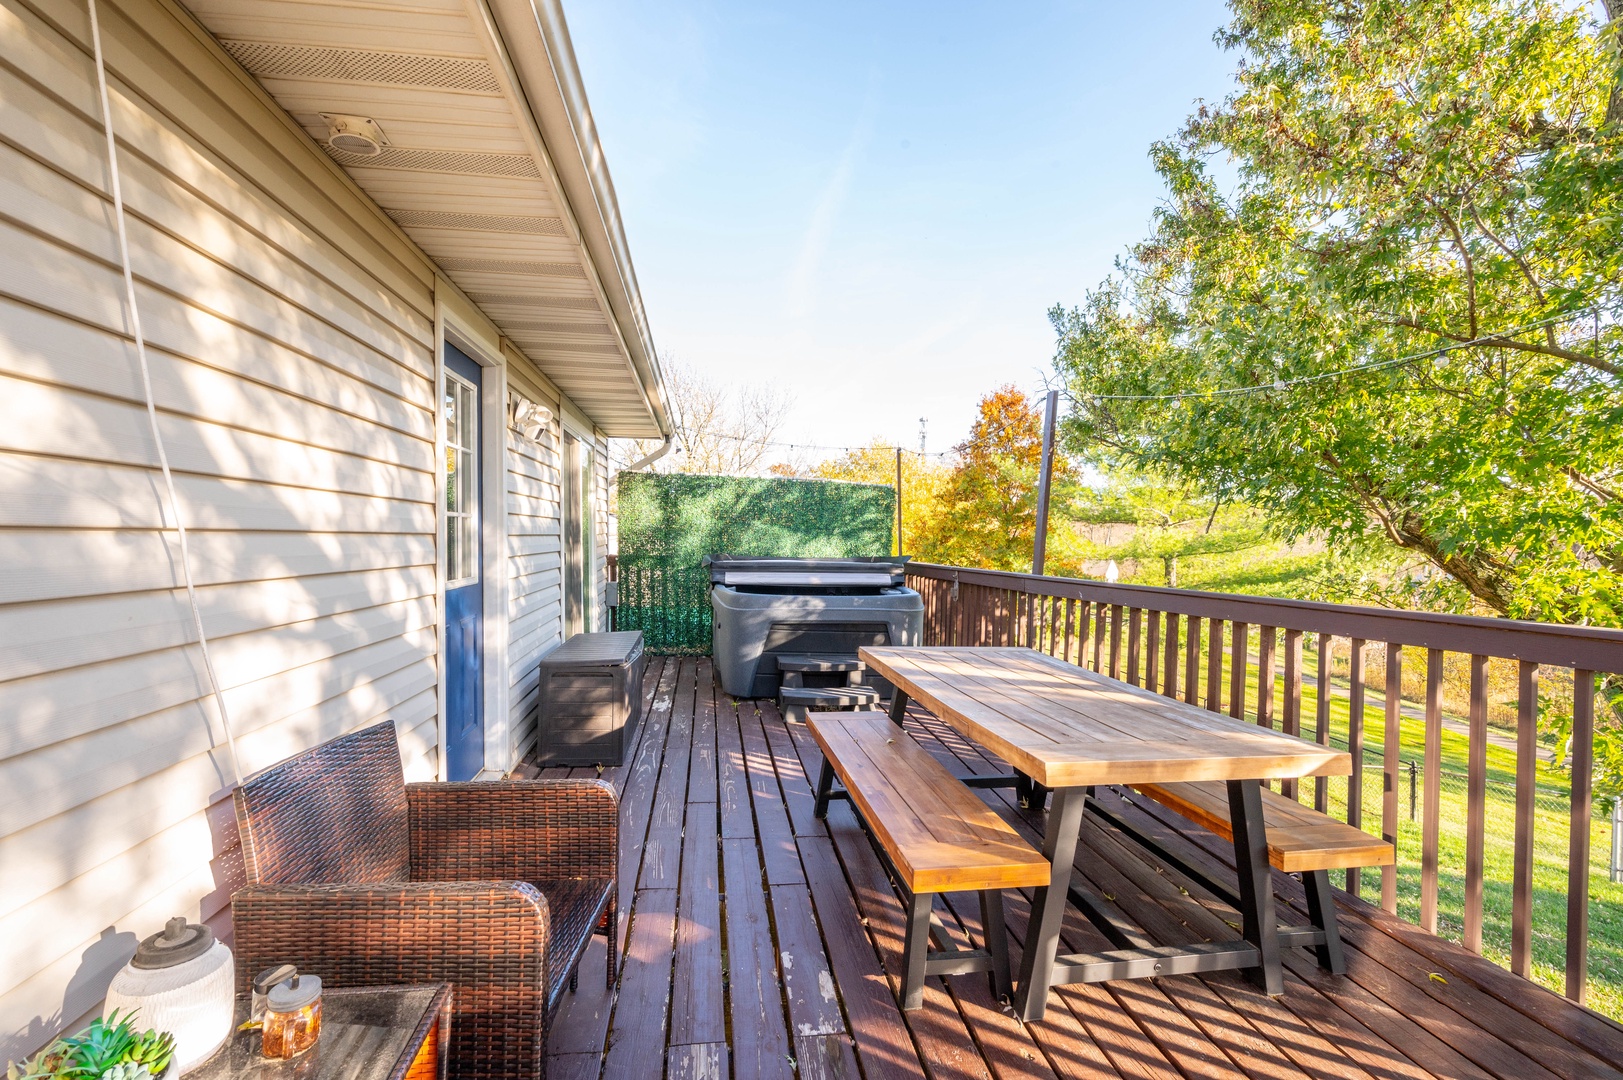 Dine al fresco or lounge the day away on the sunny back deck